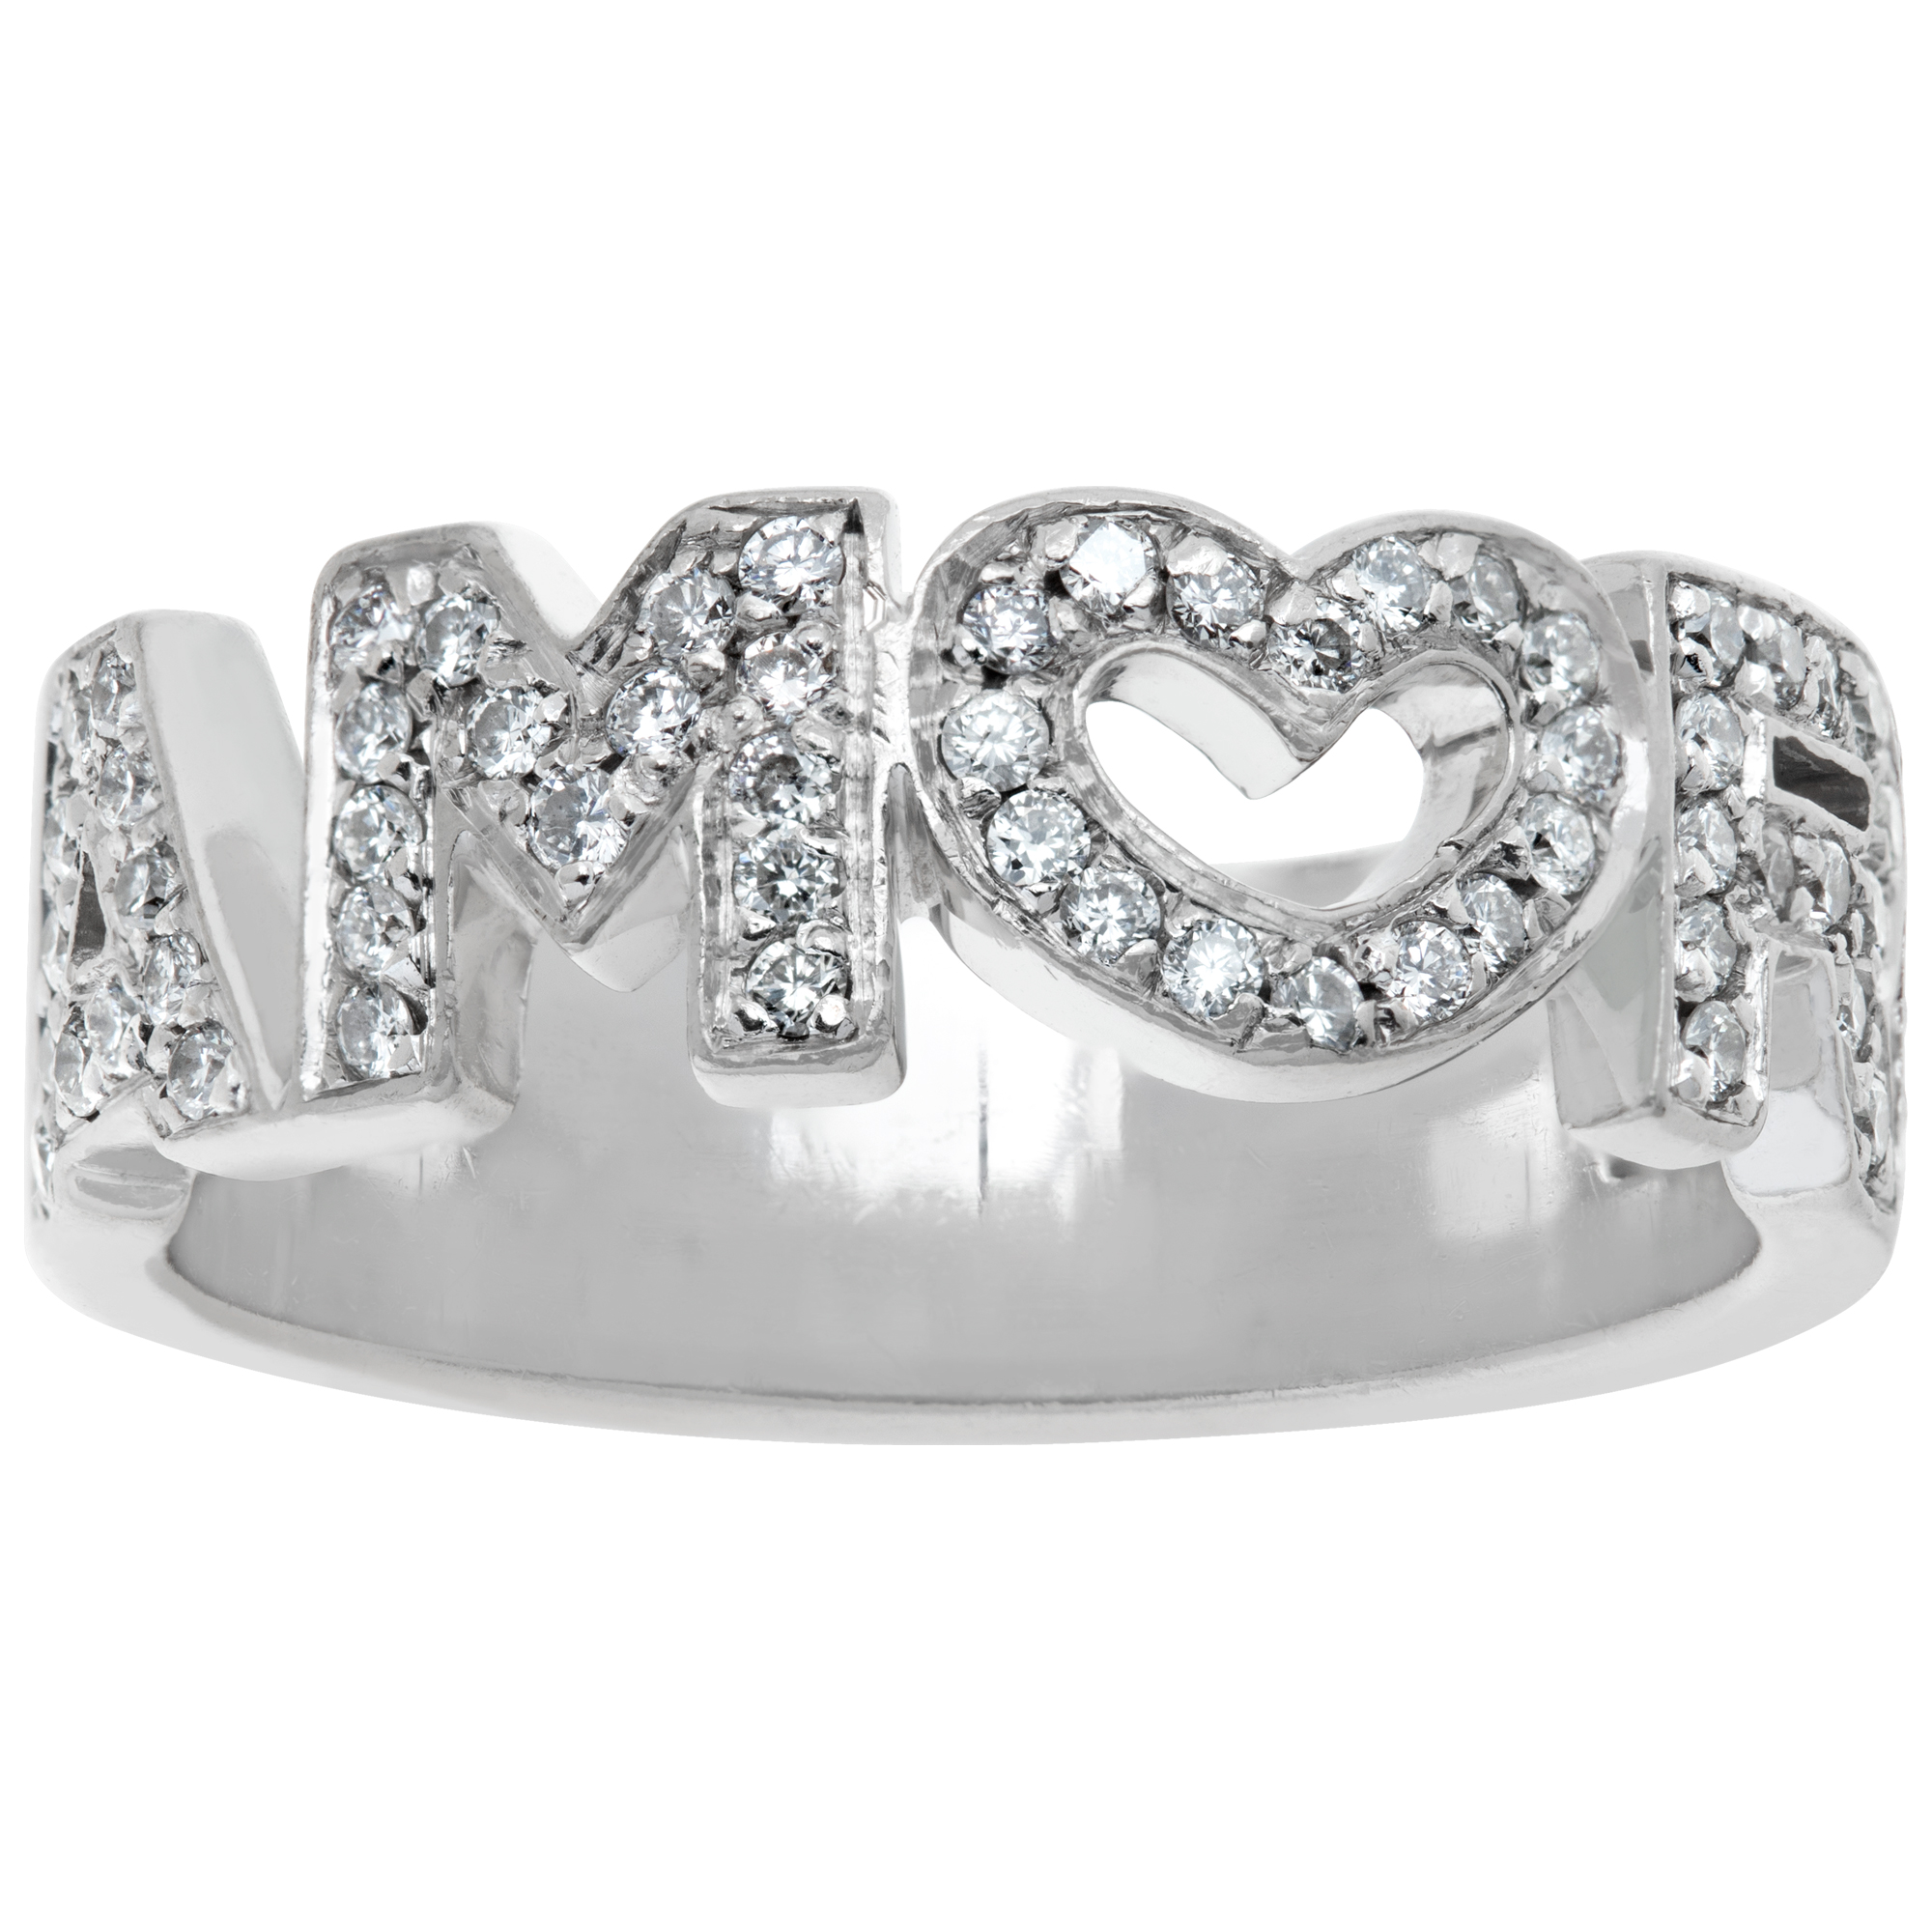 Amore ring in 18k white gold with diamonds